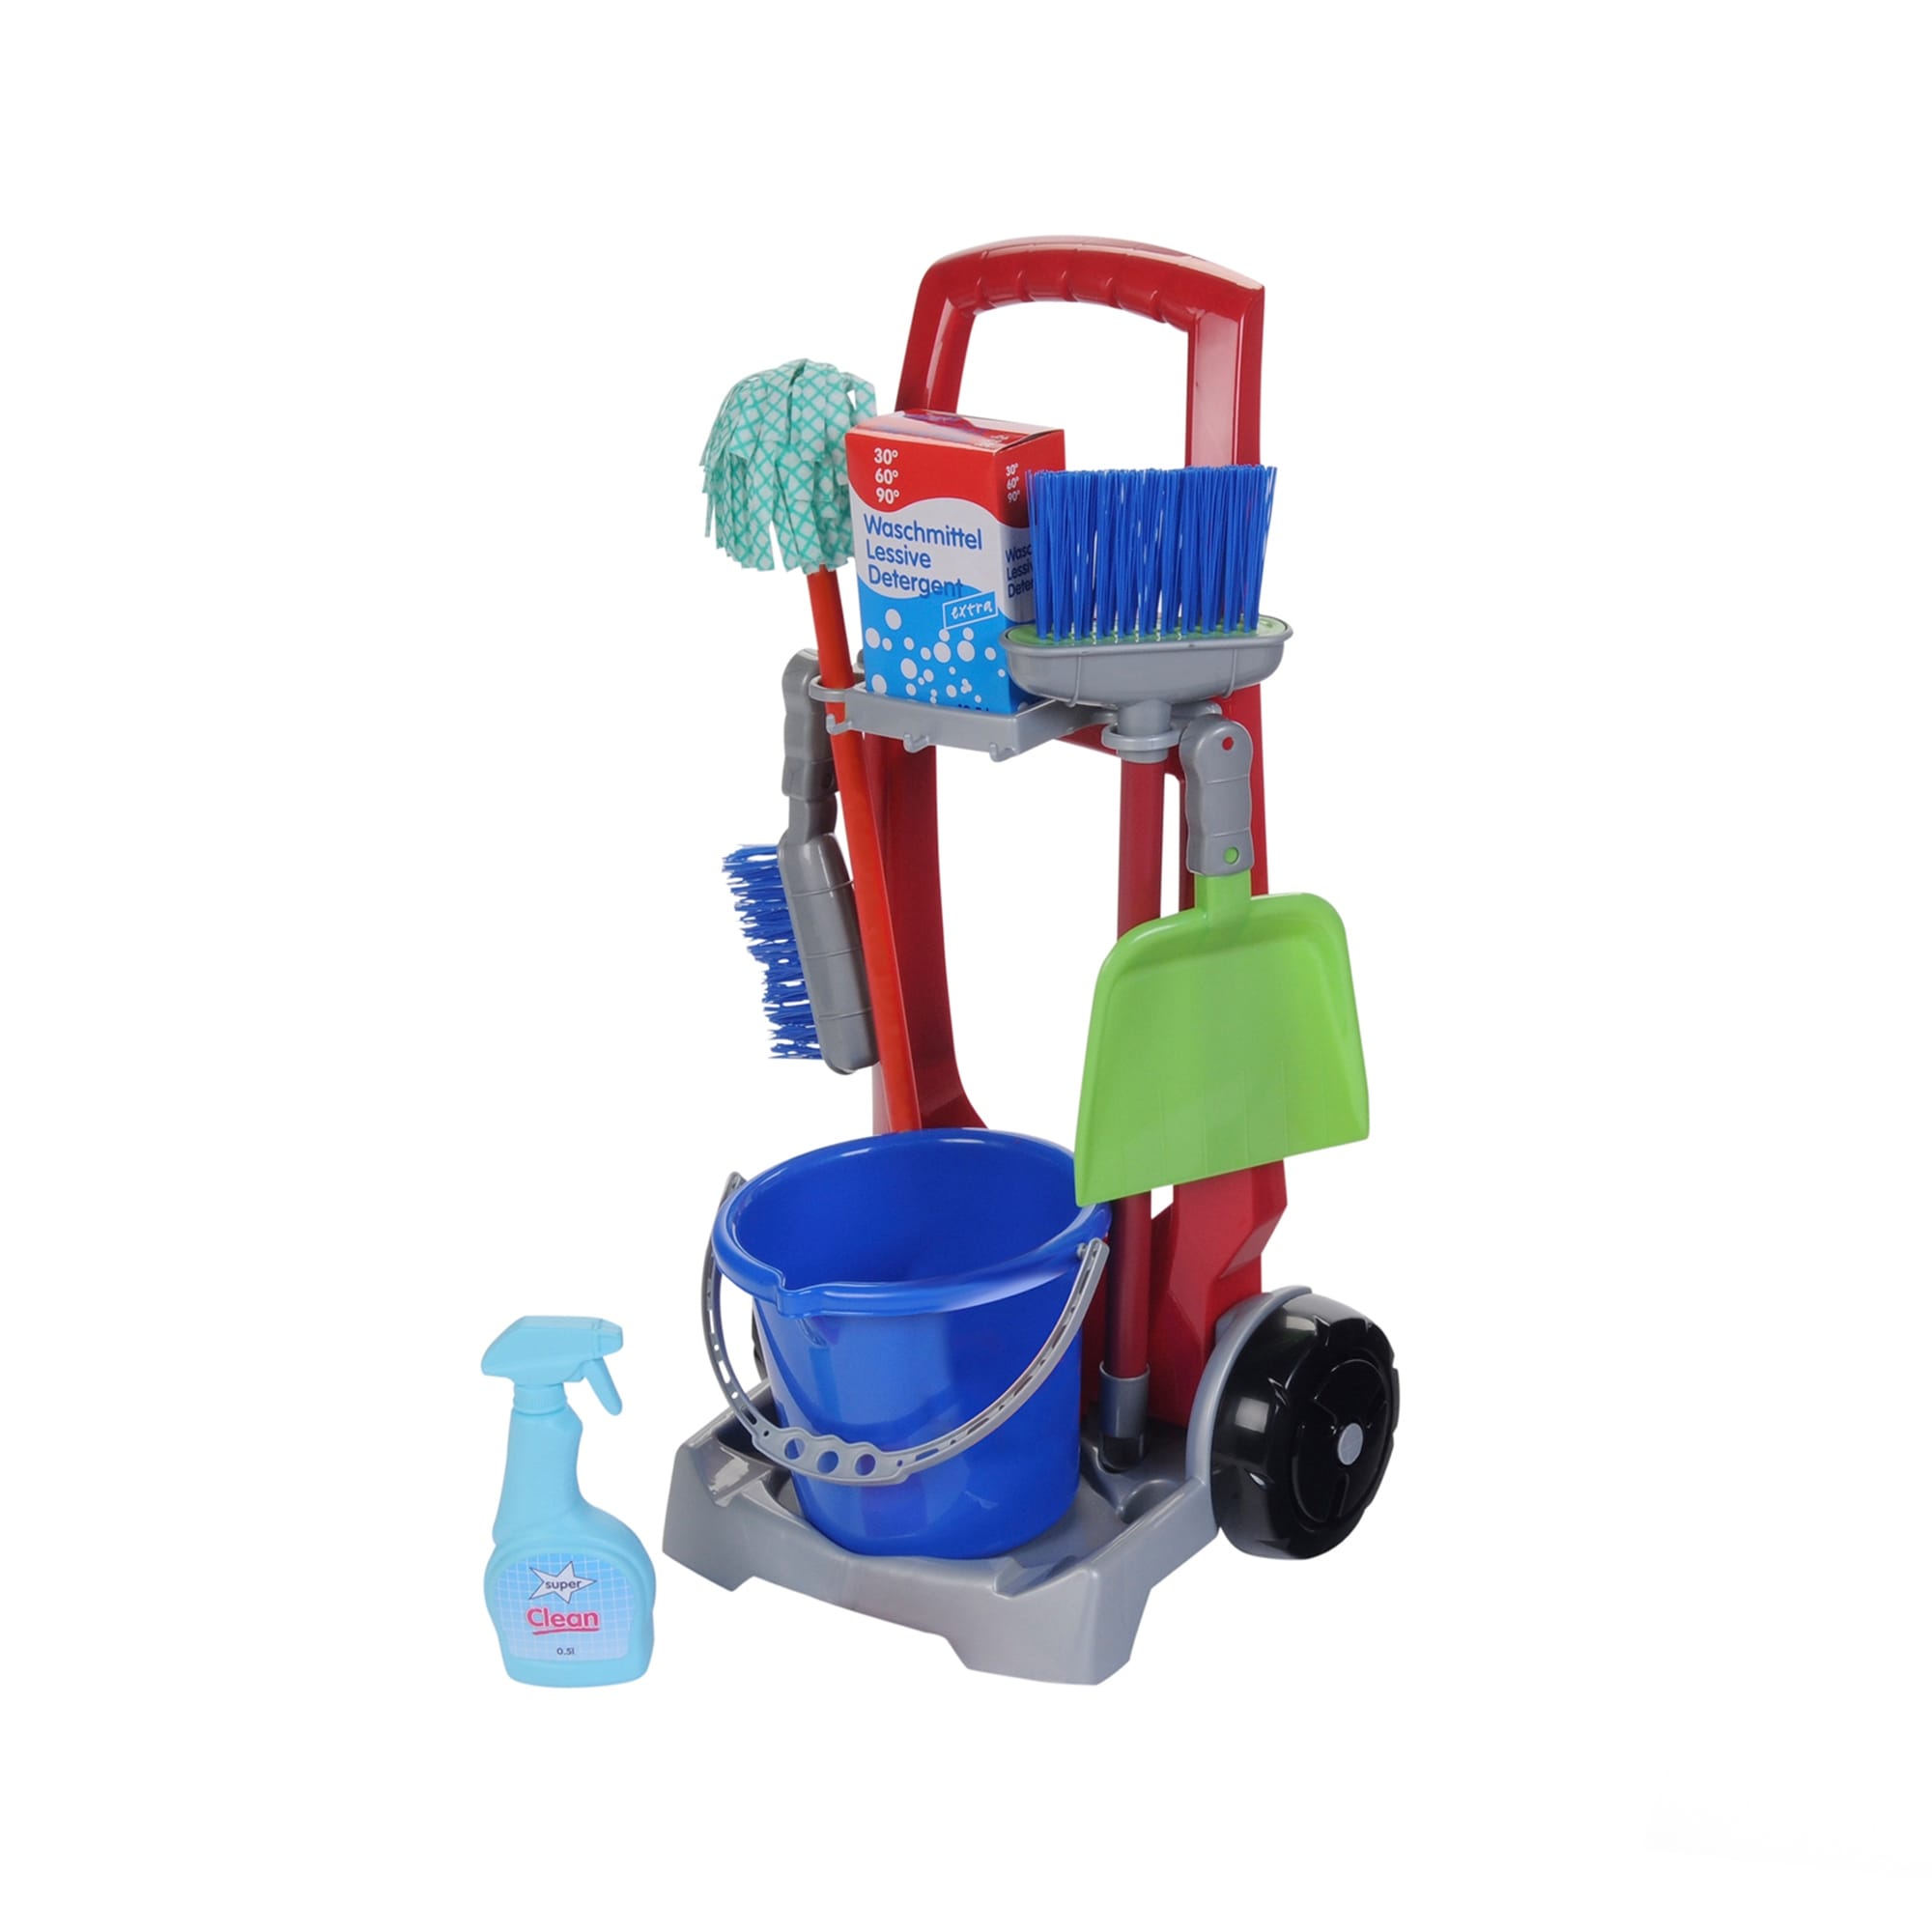 Theo Klein Kid's Cleaning Trolley with Miele Vacuum Toy Set for Ages 3 &  Up, Red - Bed Bath & Beyond - 37217511